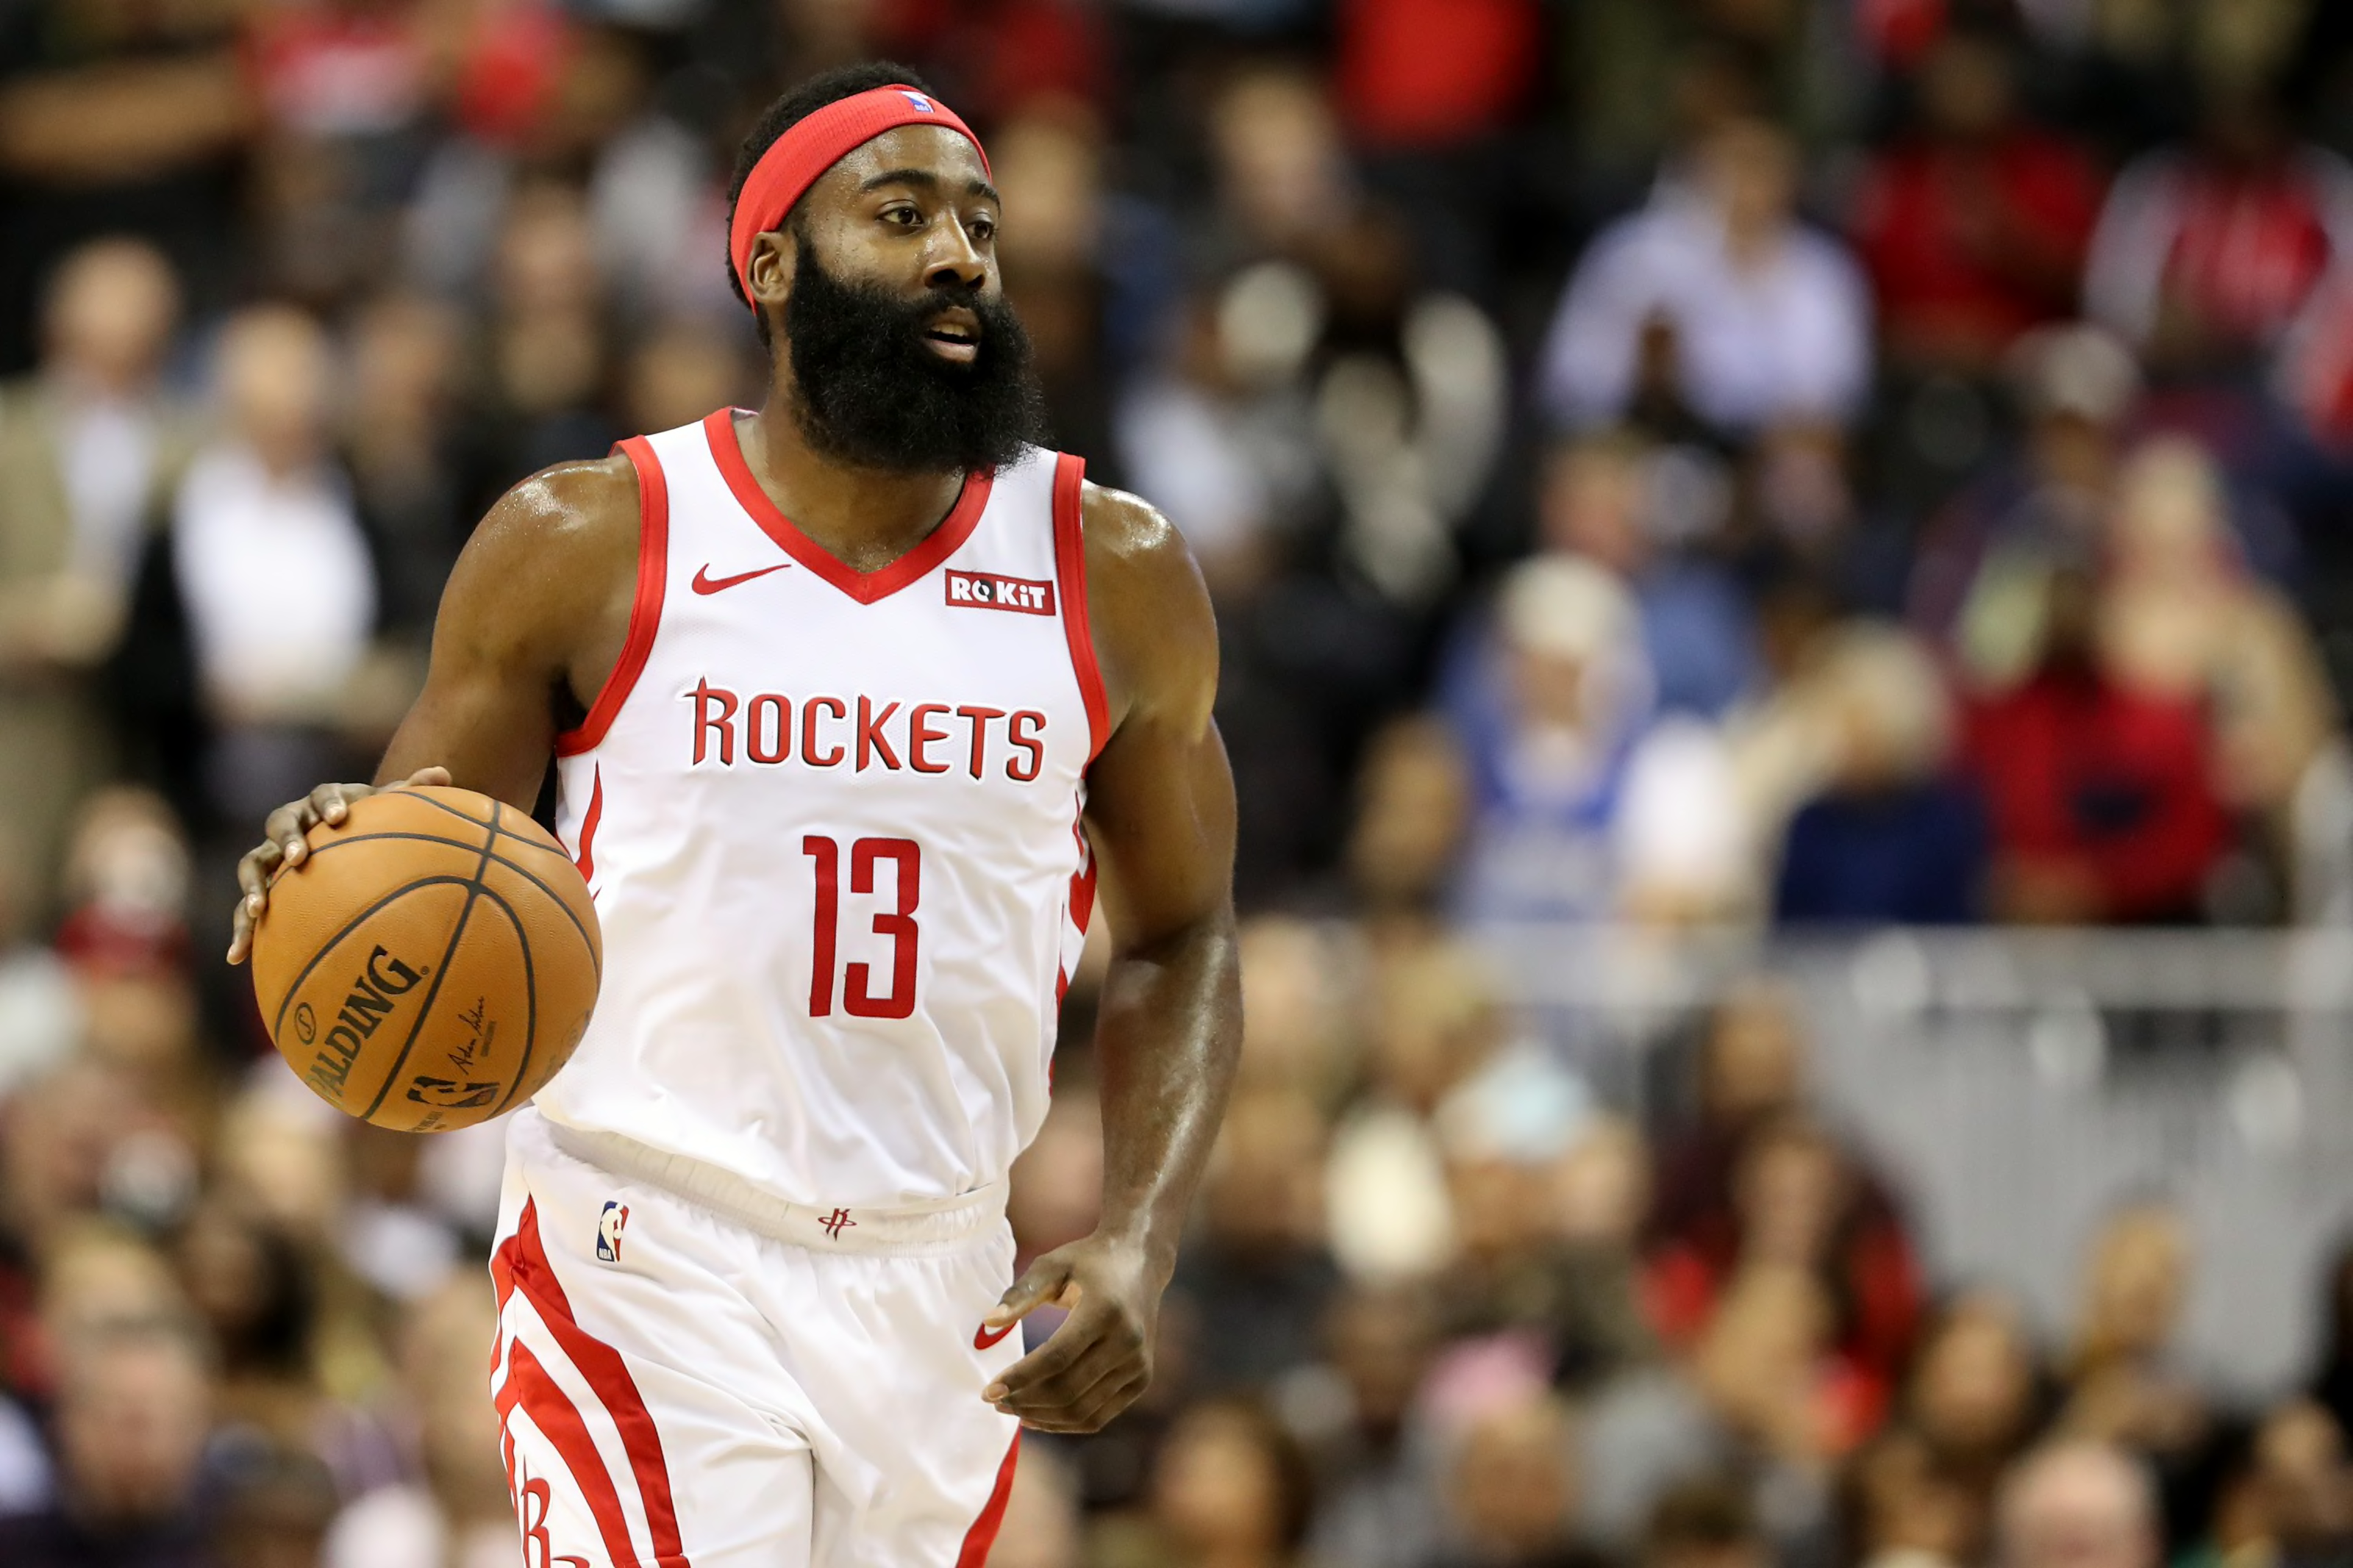 CHECK OUT JAMES HARDEN'S $6,700 CHRISTMAS OUTFIT!